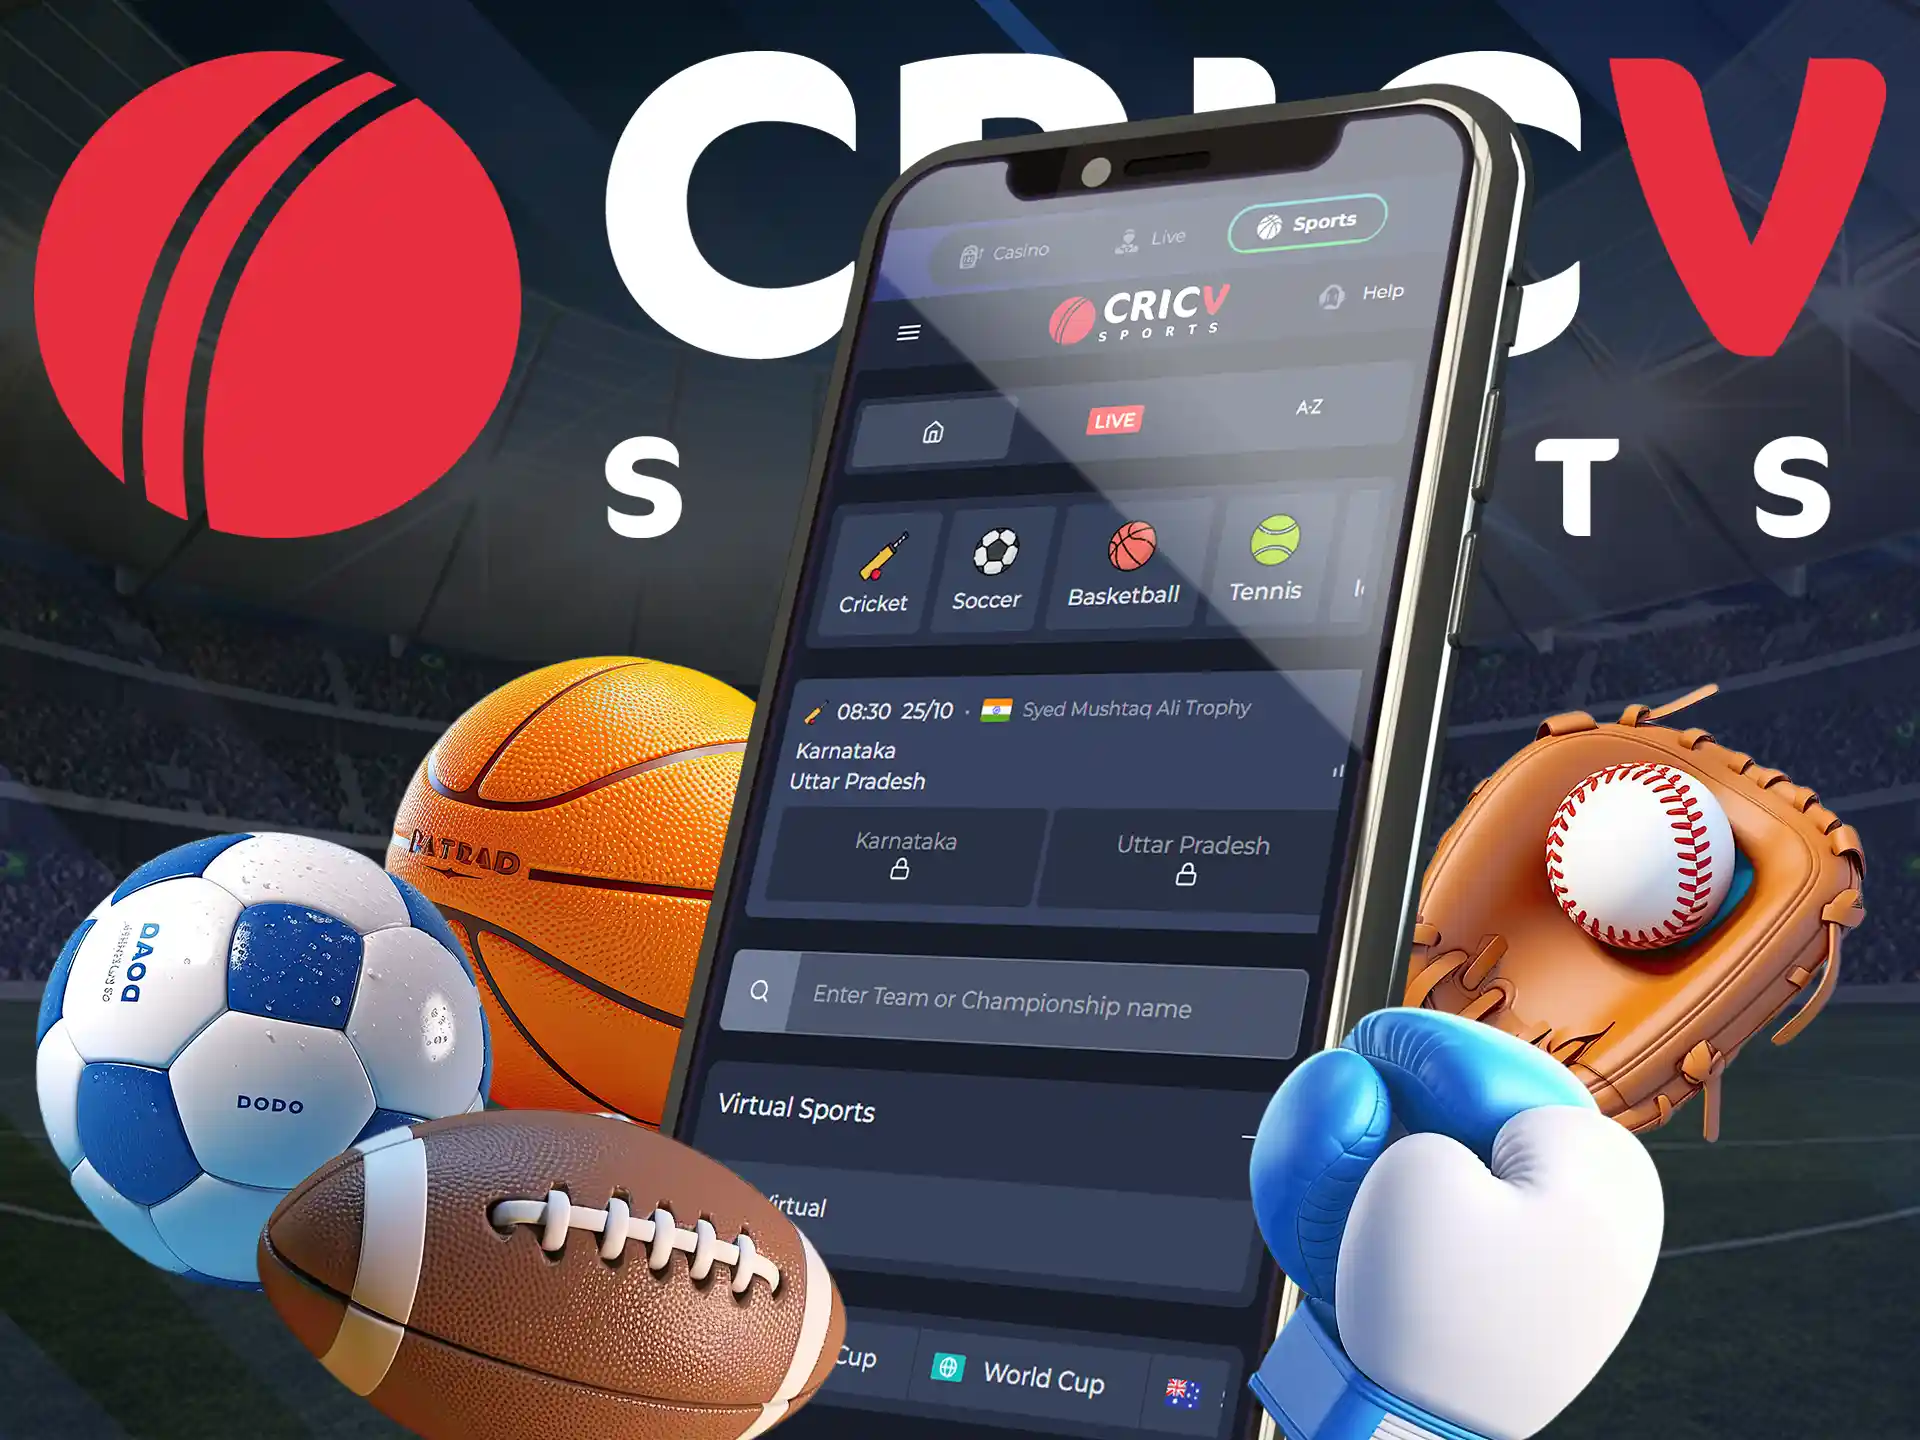 Place sports bets in the CricV app on your favorite sports and events.